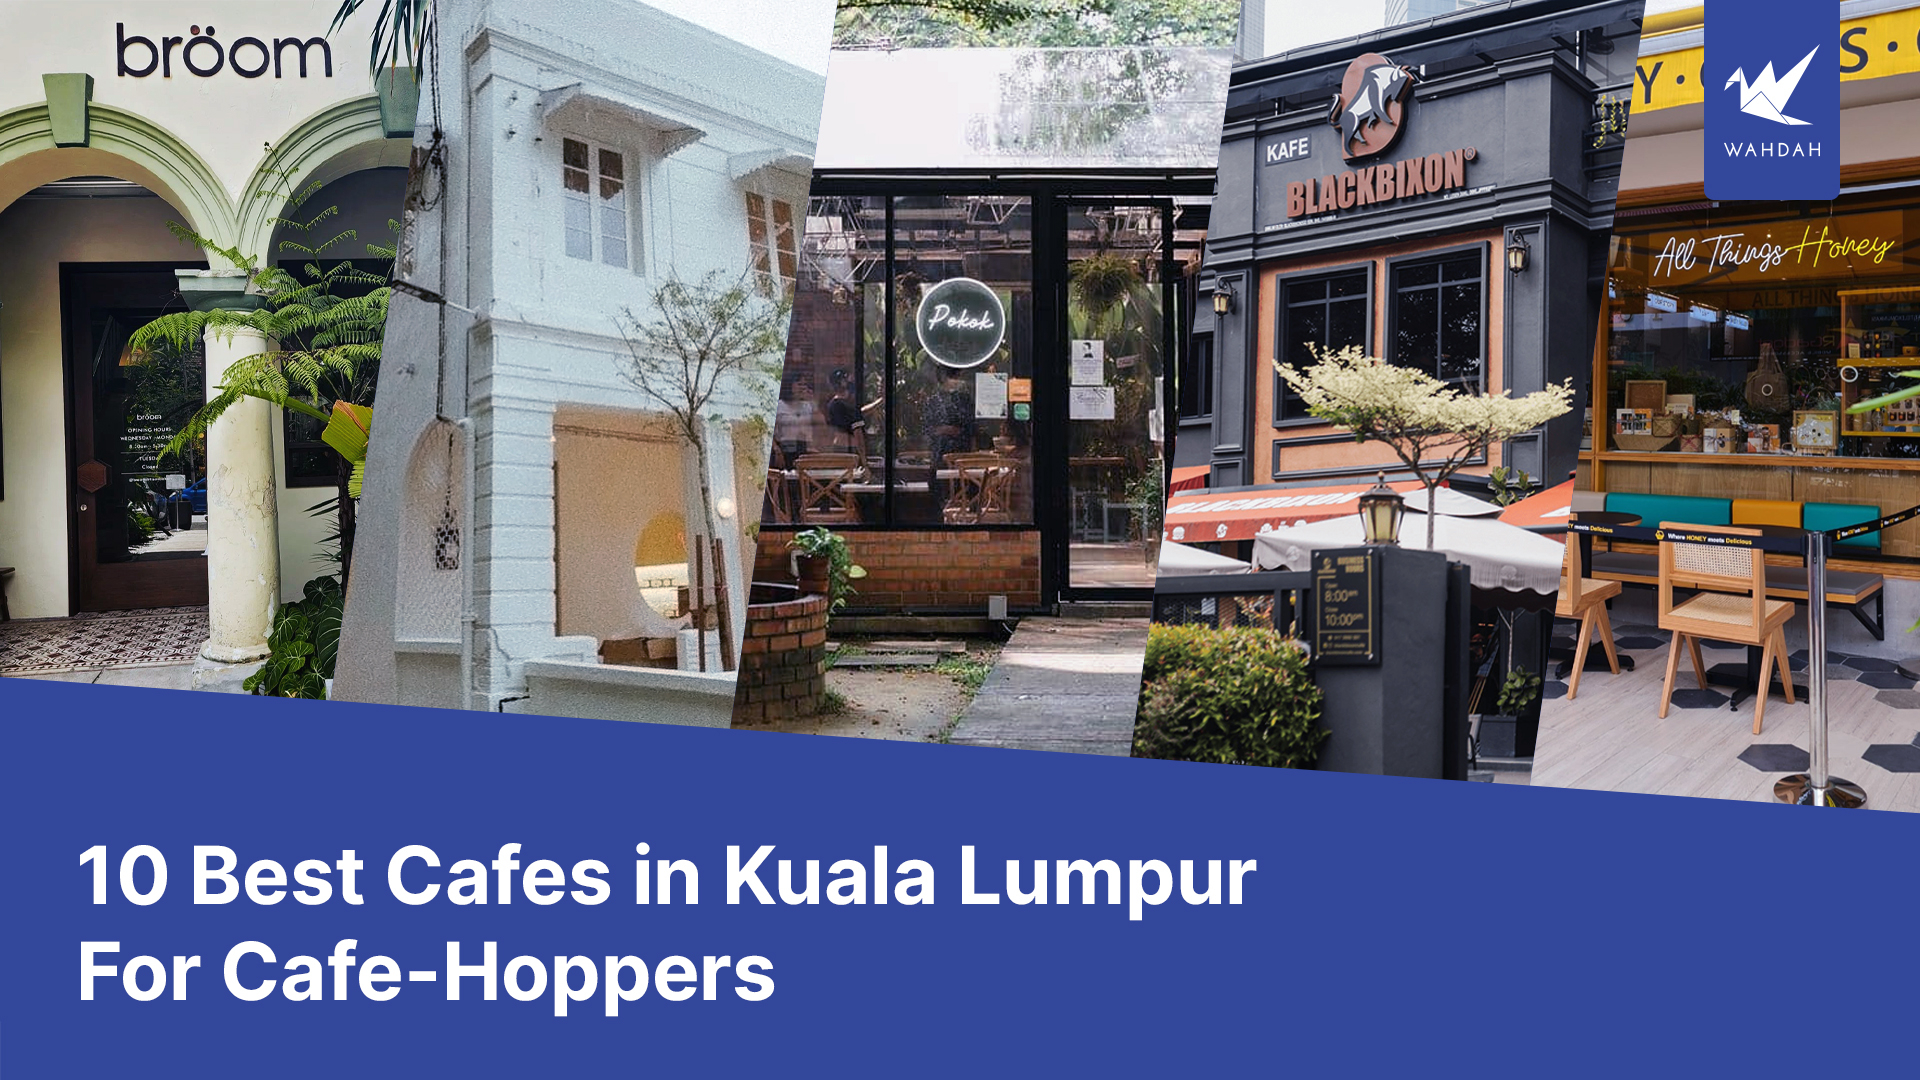 10 Best Cafes in Kuala Lumpur For Cafe-Hoppers